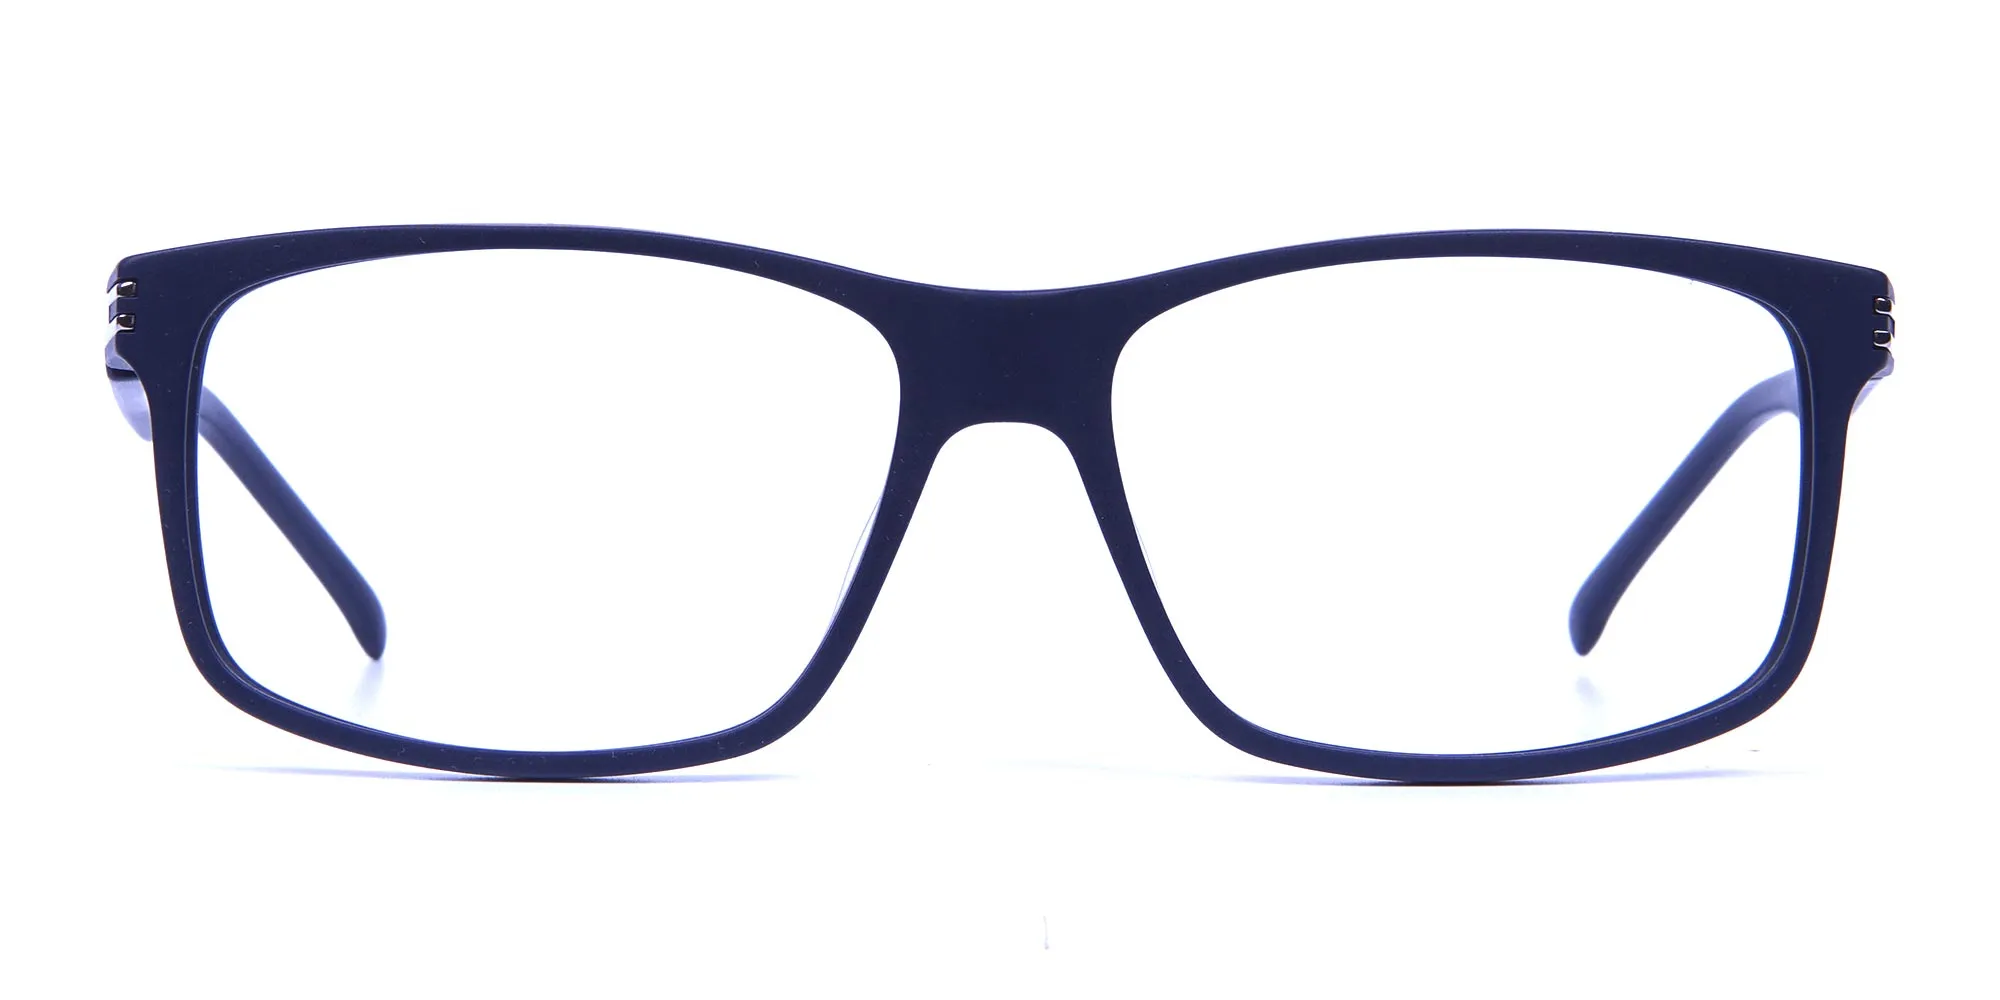 Light Weight Detail Crafted Glasses in Blue - 1